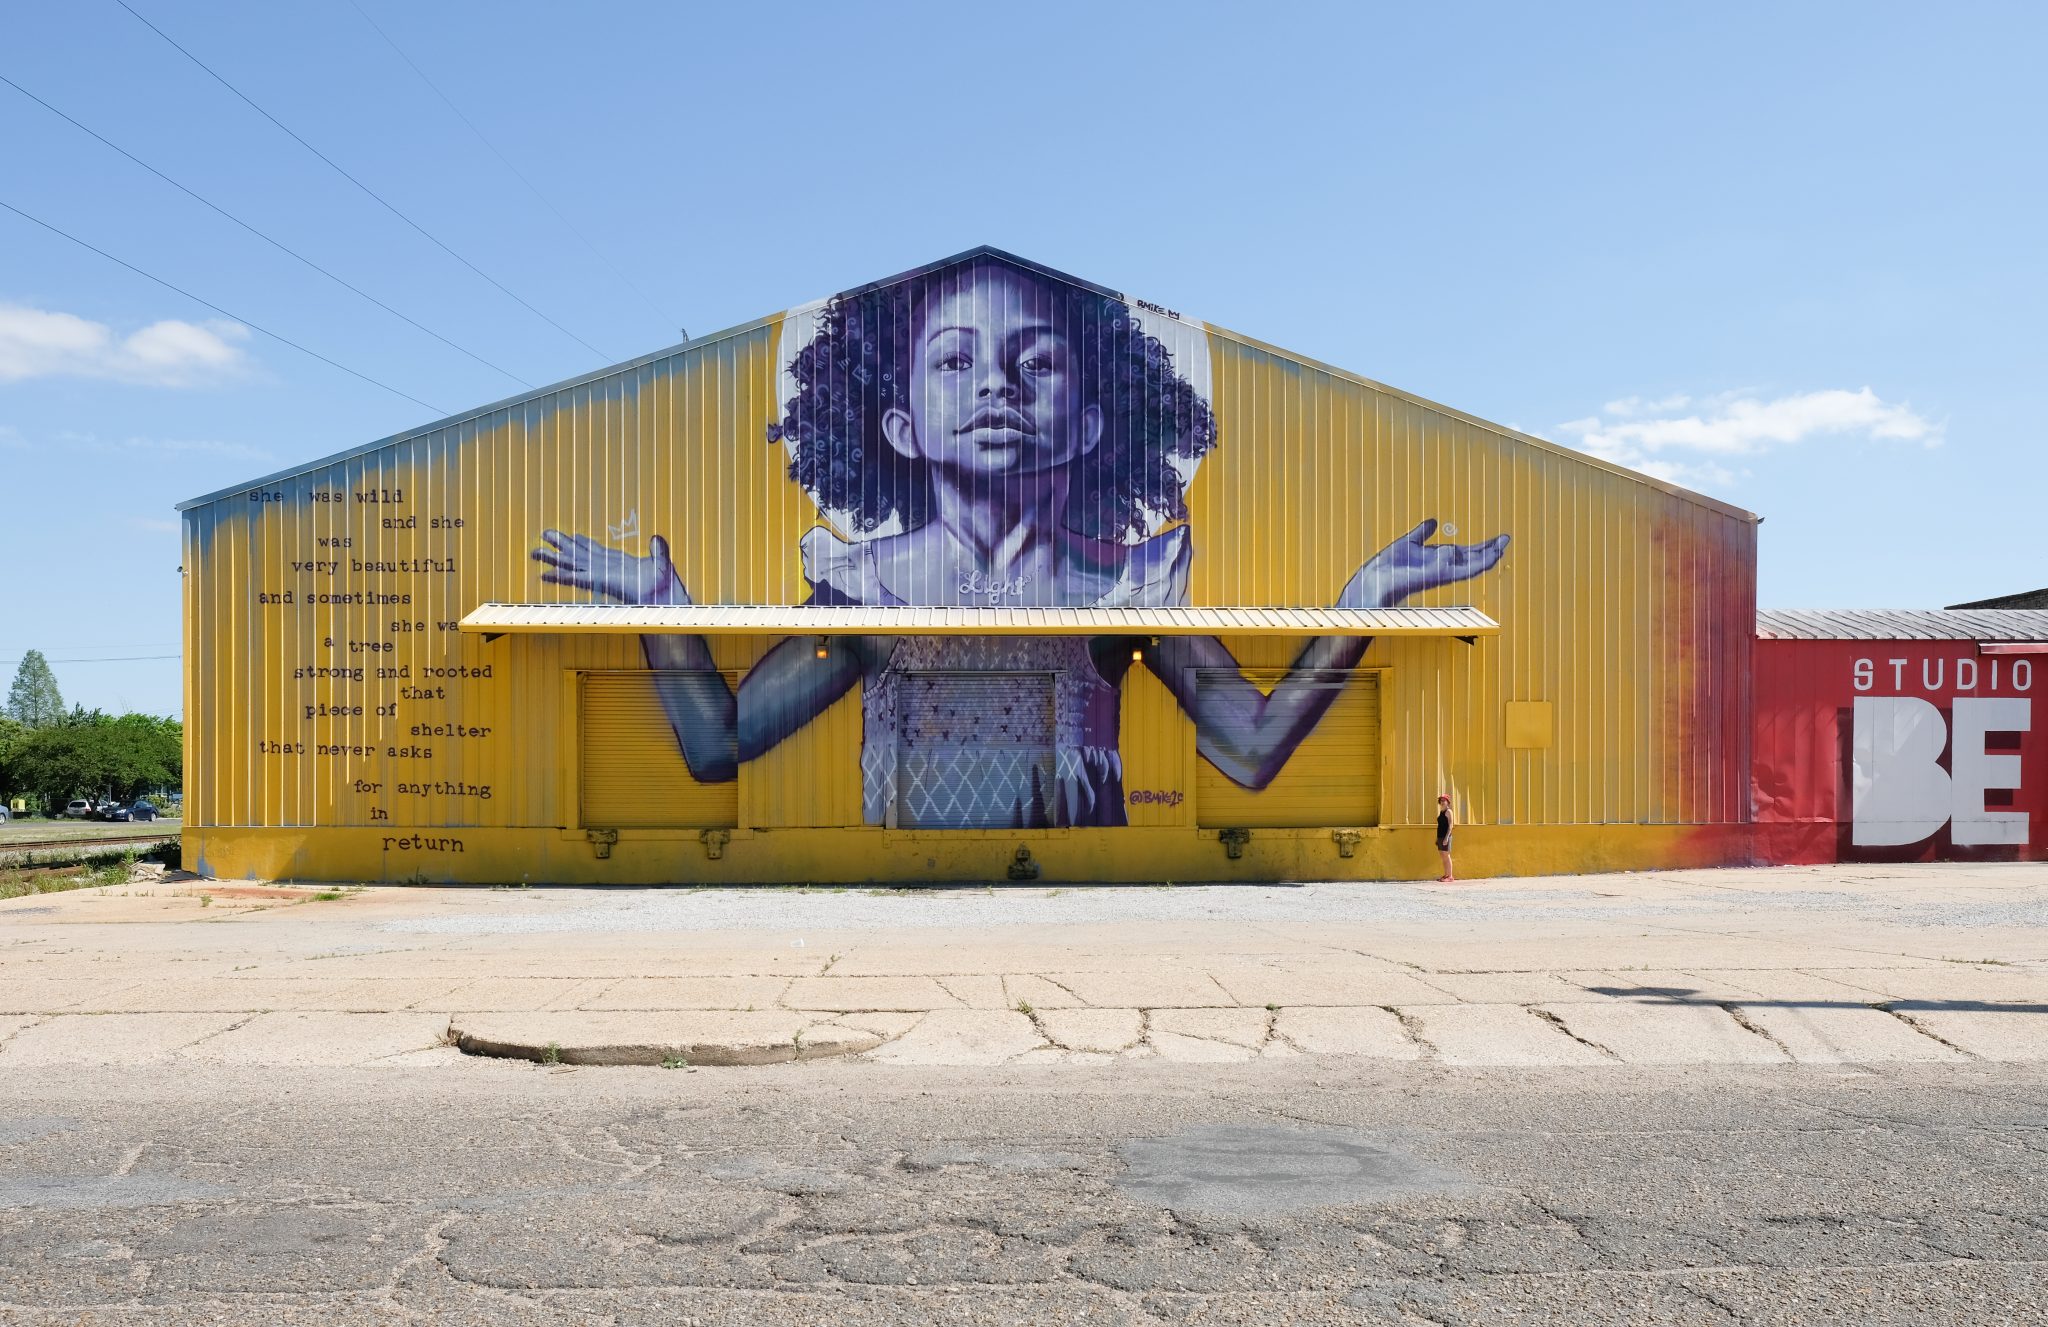 A mural by Brandan "B-Mike" Odums in New Orleans at Studio BE